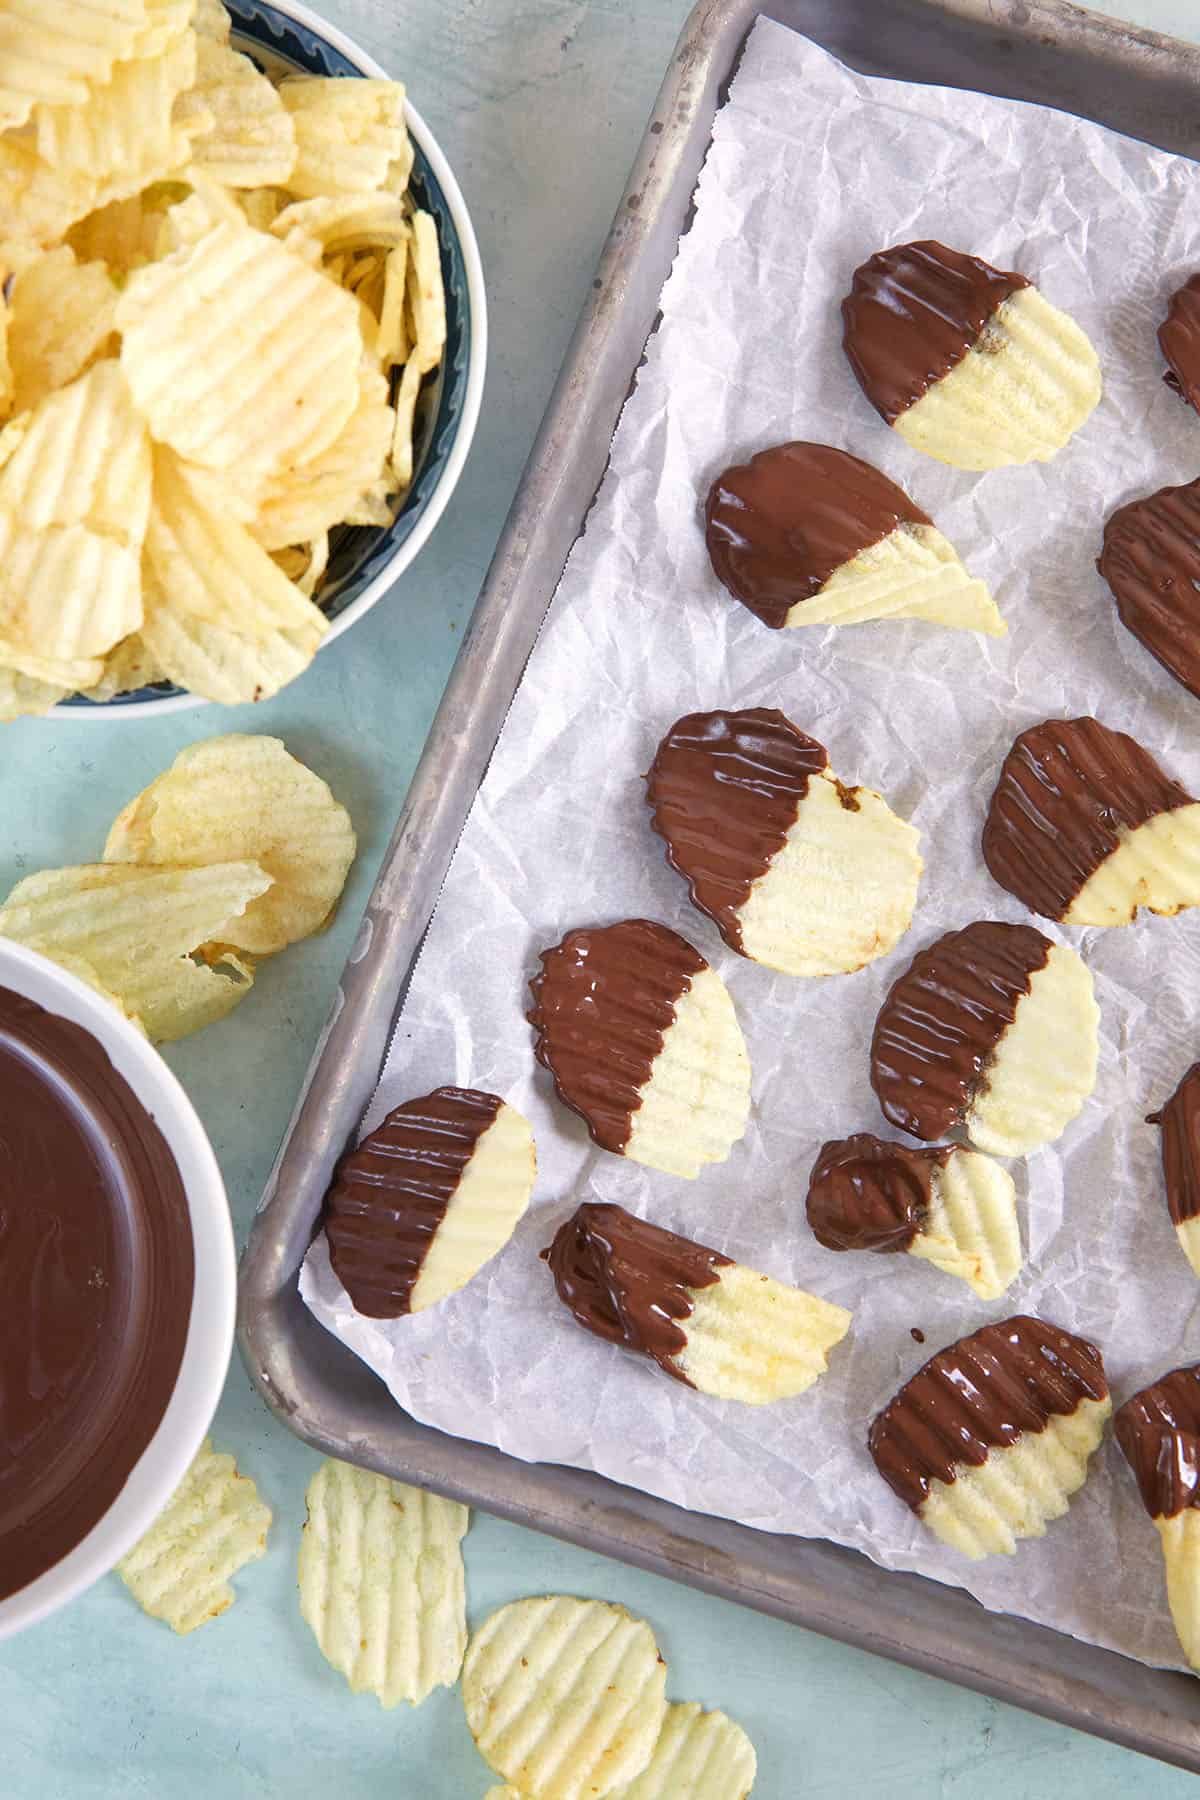 Chocolate dipped potato chips are on a prepared baking sheet, next to more chips and melted chocolate. 